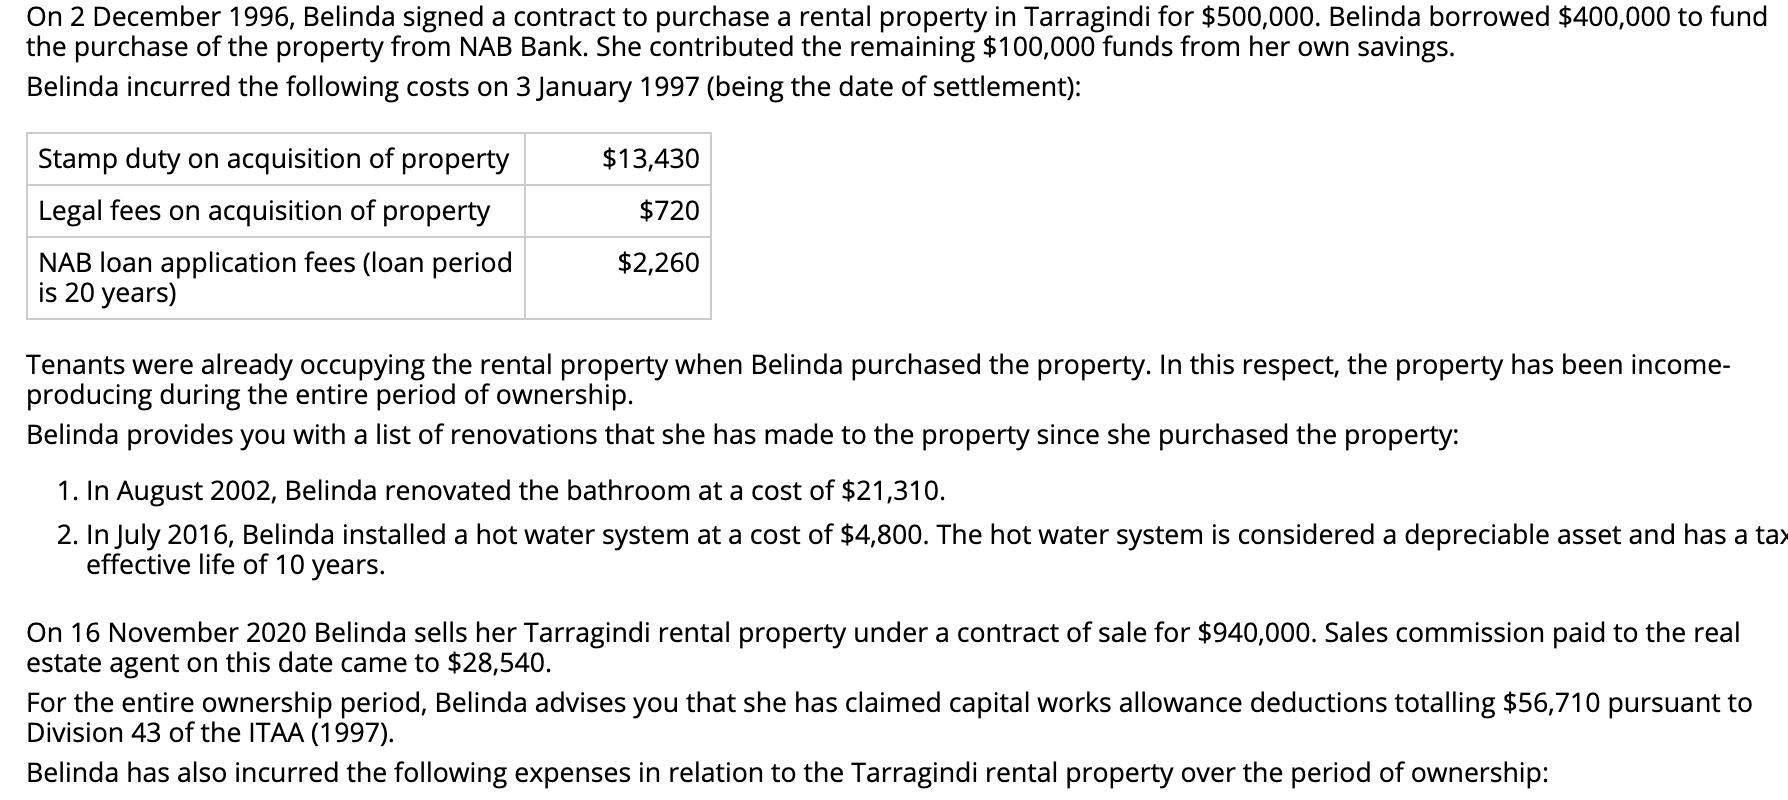 On 2 December 1996 , Belinda signed a contract to purchase a rental property in Tarragindi for ( $ 500,000 ). Belinda borr